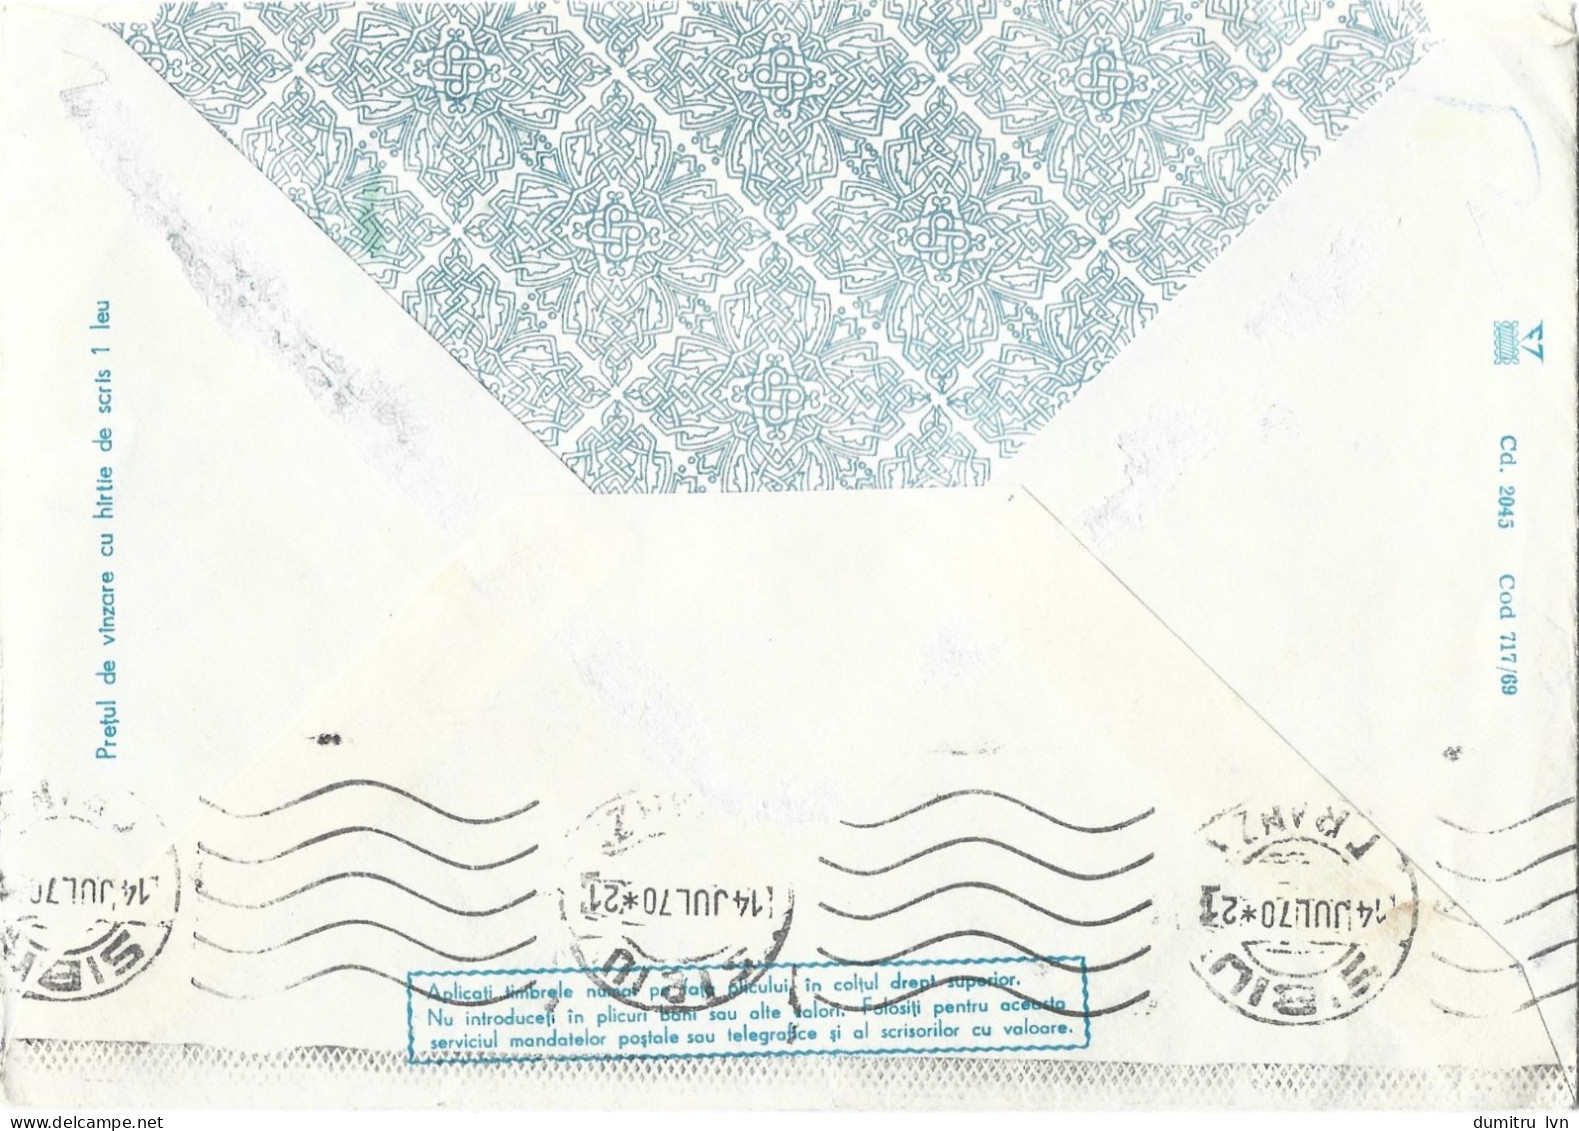 ROMANIA 1969 WINTER LANDSCAPE, SKIERS, CIRCULATED ENVELOPE, COVER STATIONERY - Enteros Postales